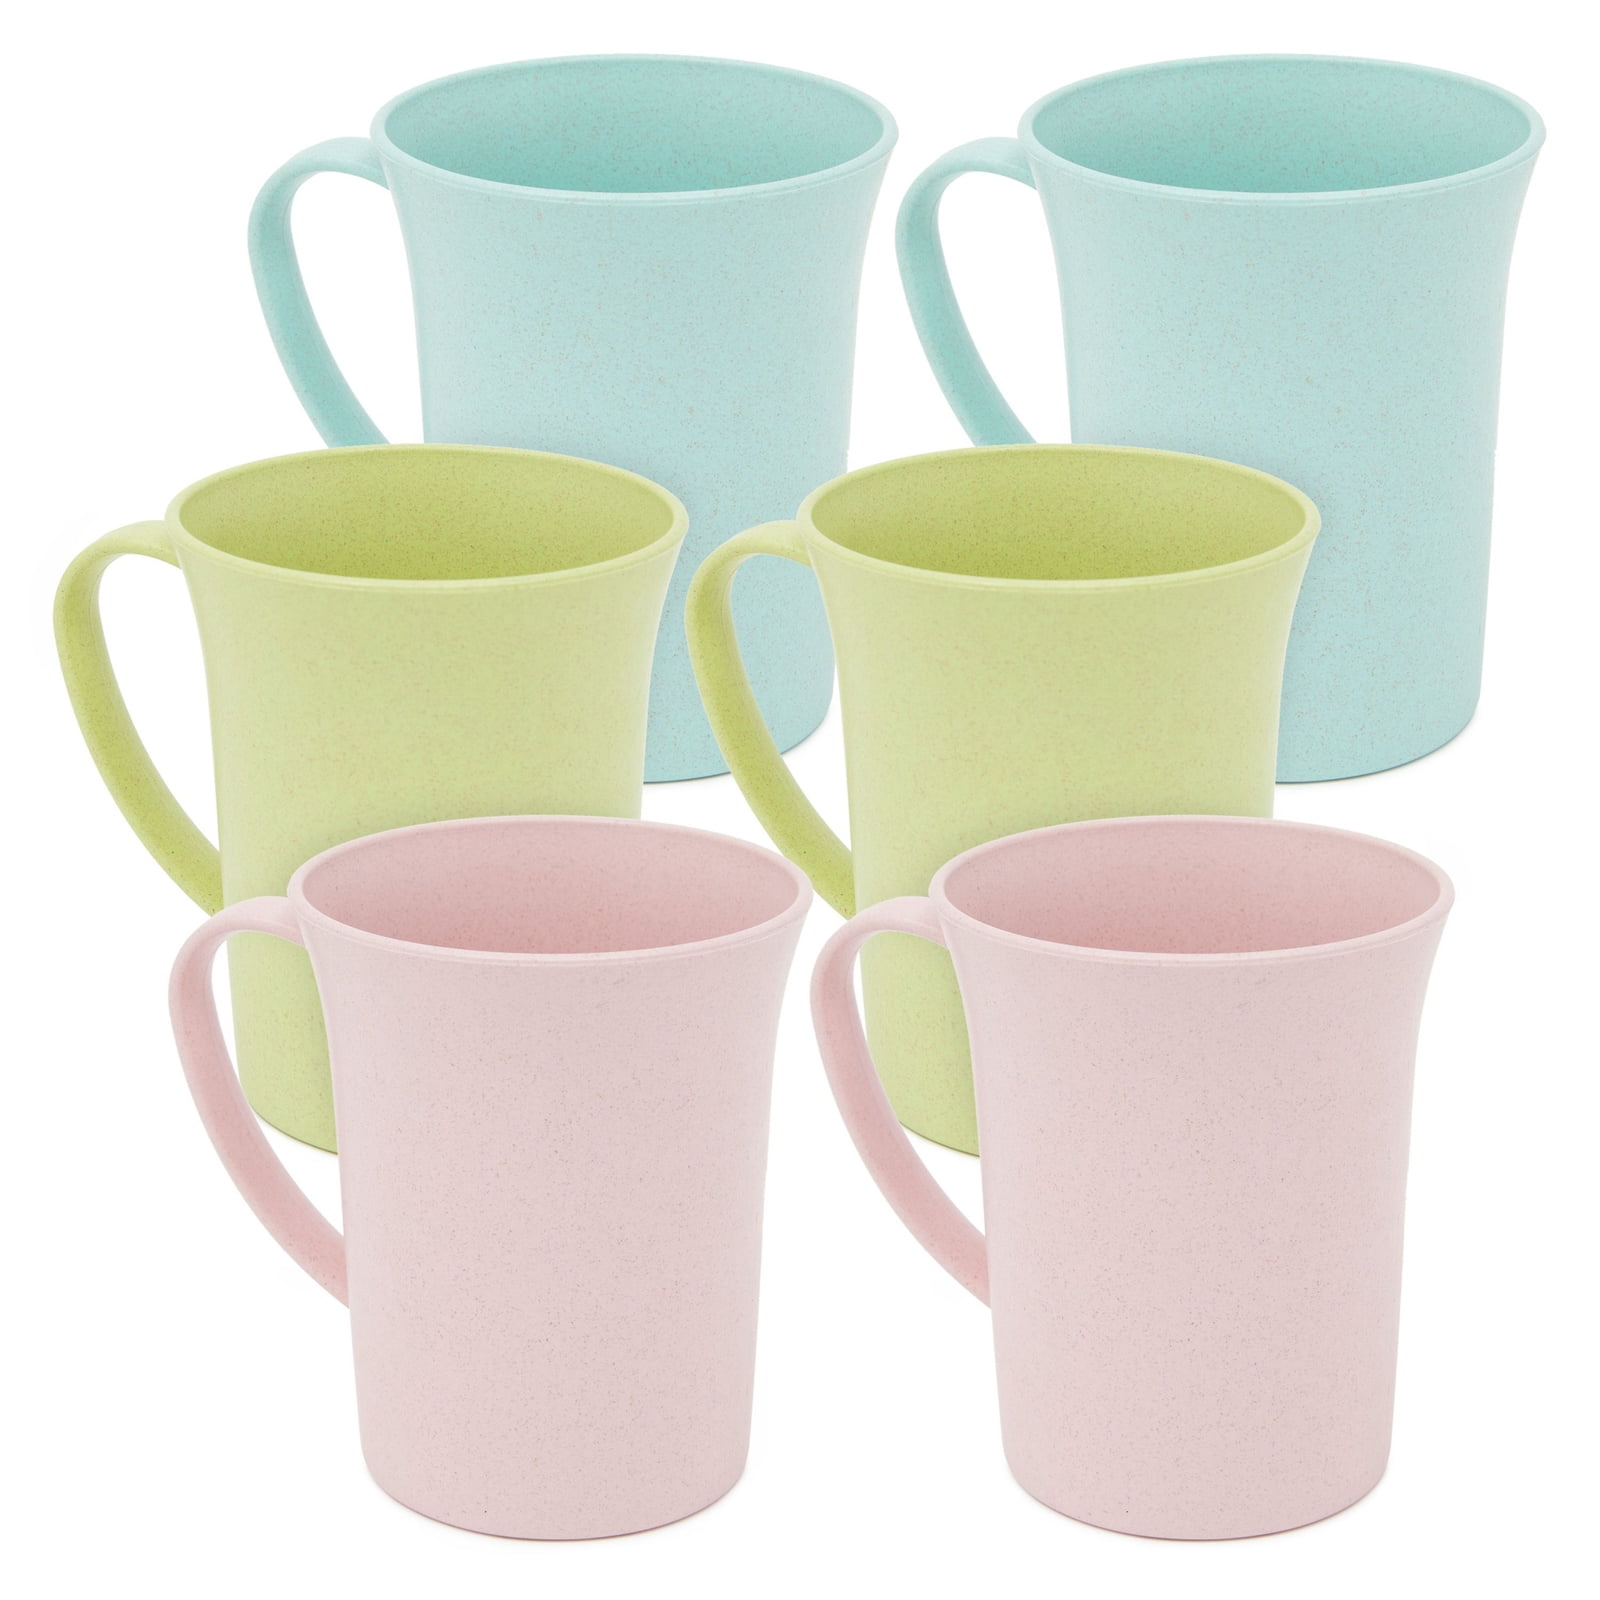 Wheat Straw Mugs with Handle, Set of 6 Unbreakable Plastic Coffee Cups (3  Colors, 13.8 oz), PACK - Kroger